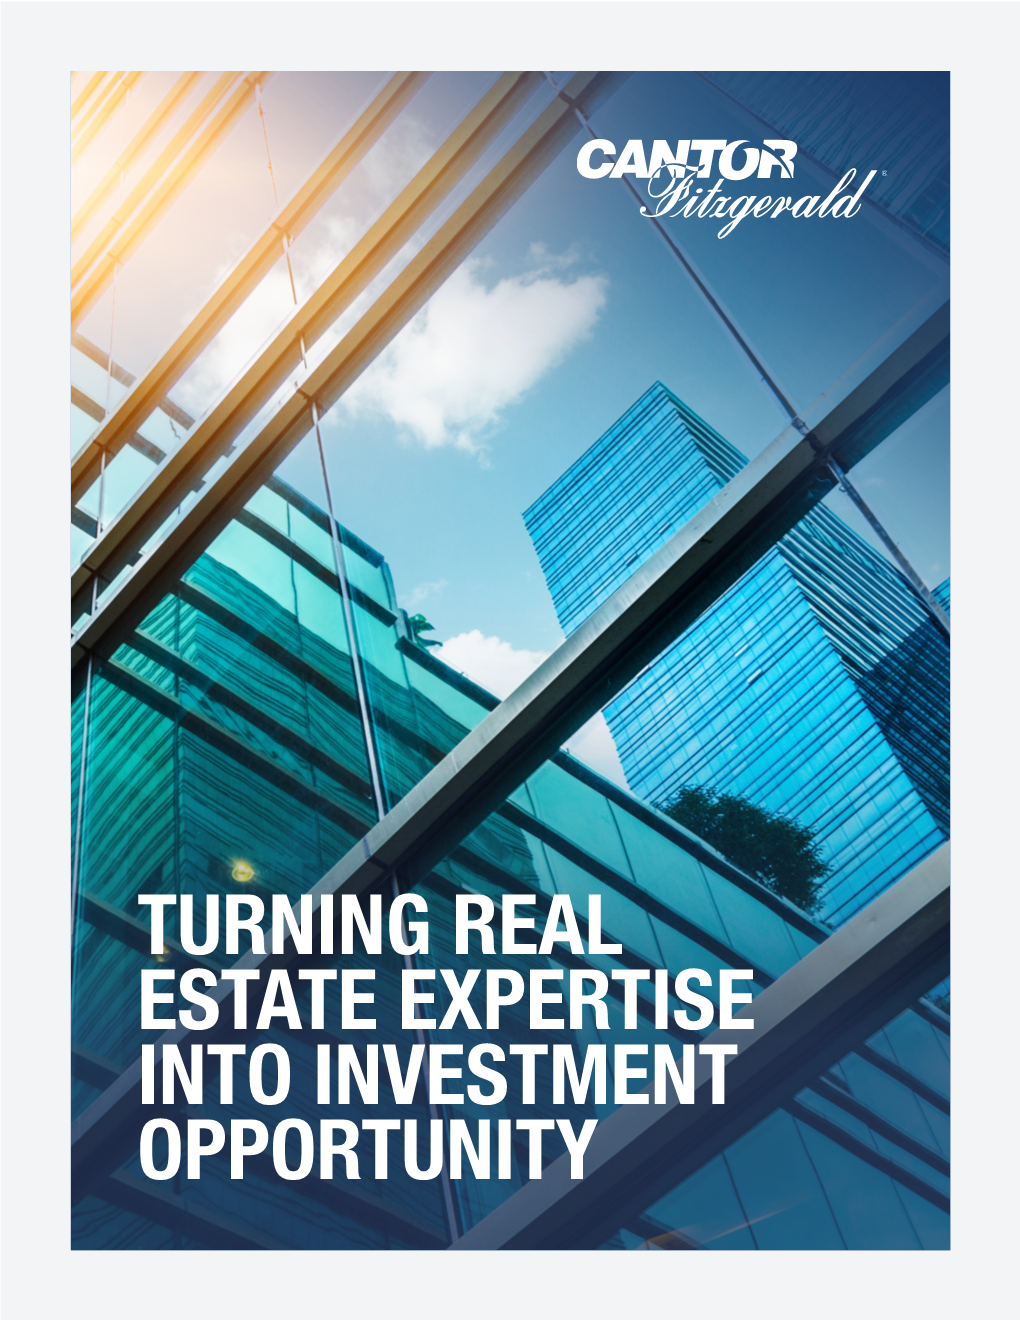 TURNING REAL ESTATE EXPERTISE INTO INVESTMENT OPPORTUNITY Cantor Fitzgerald